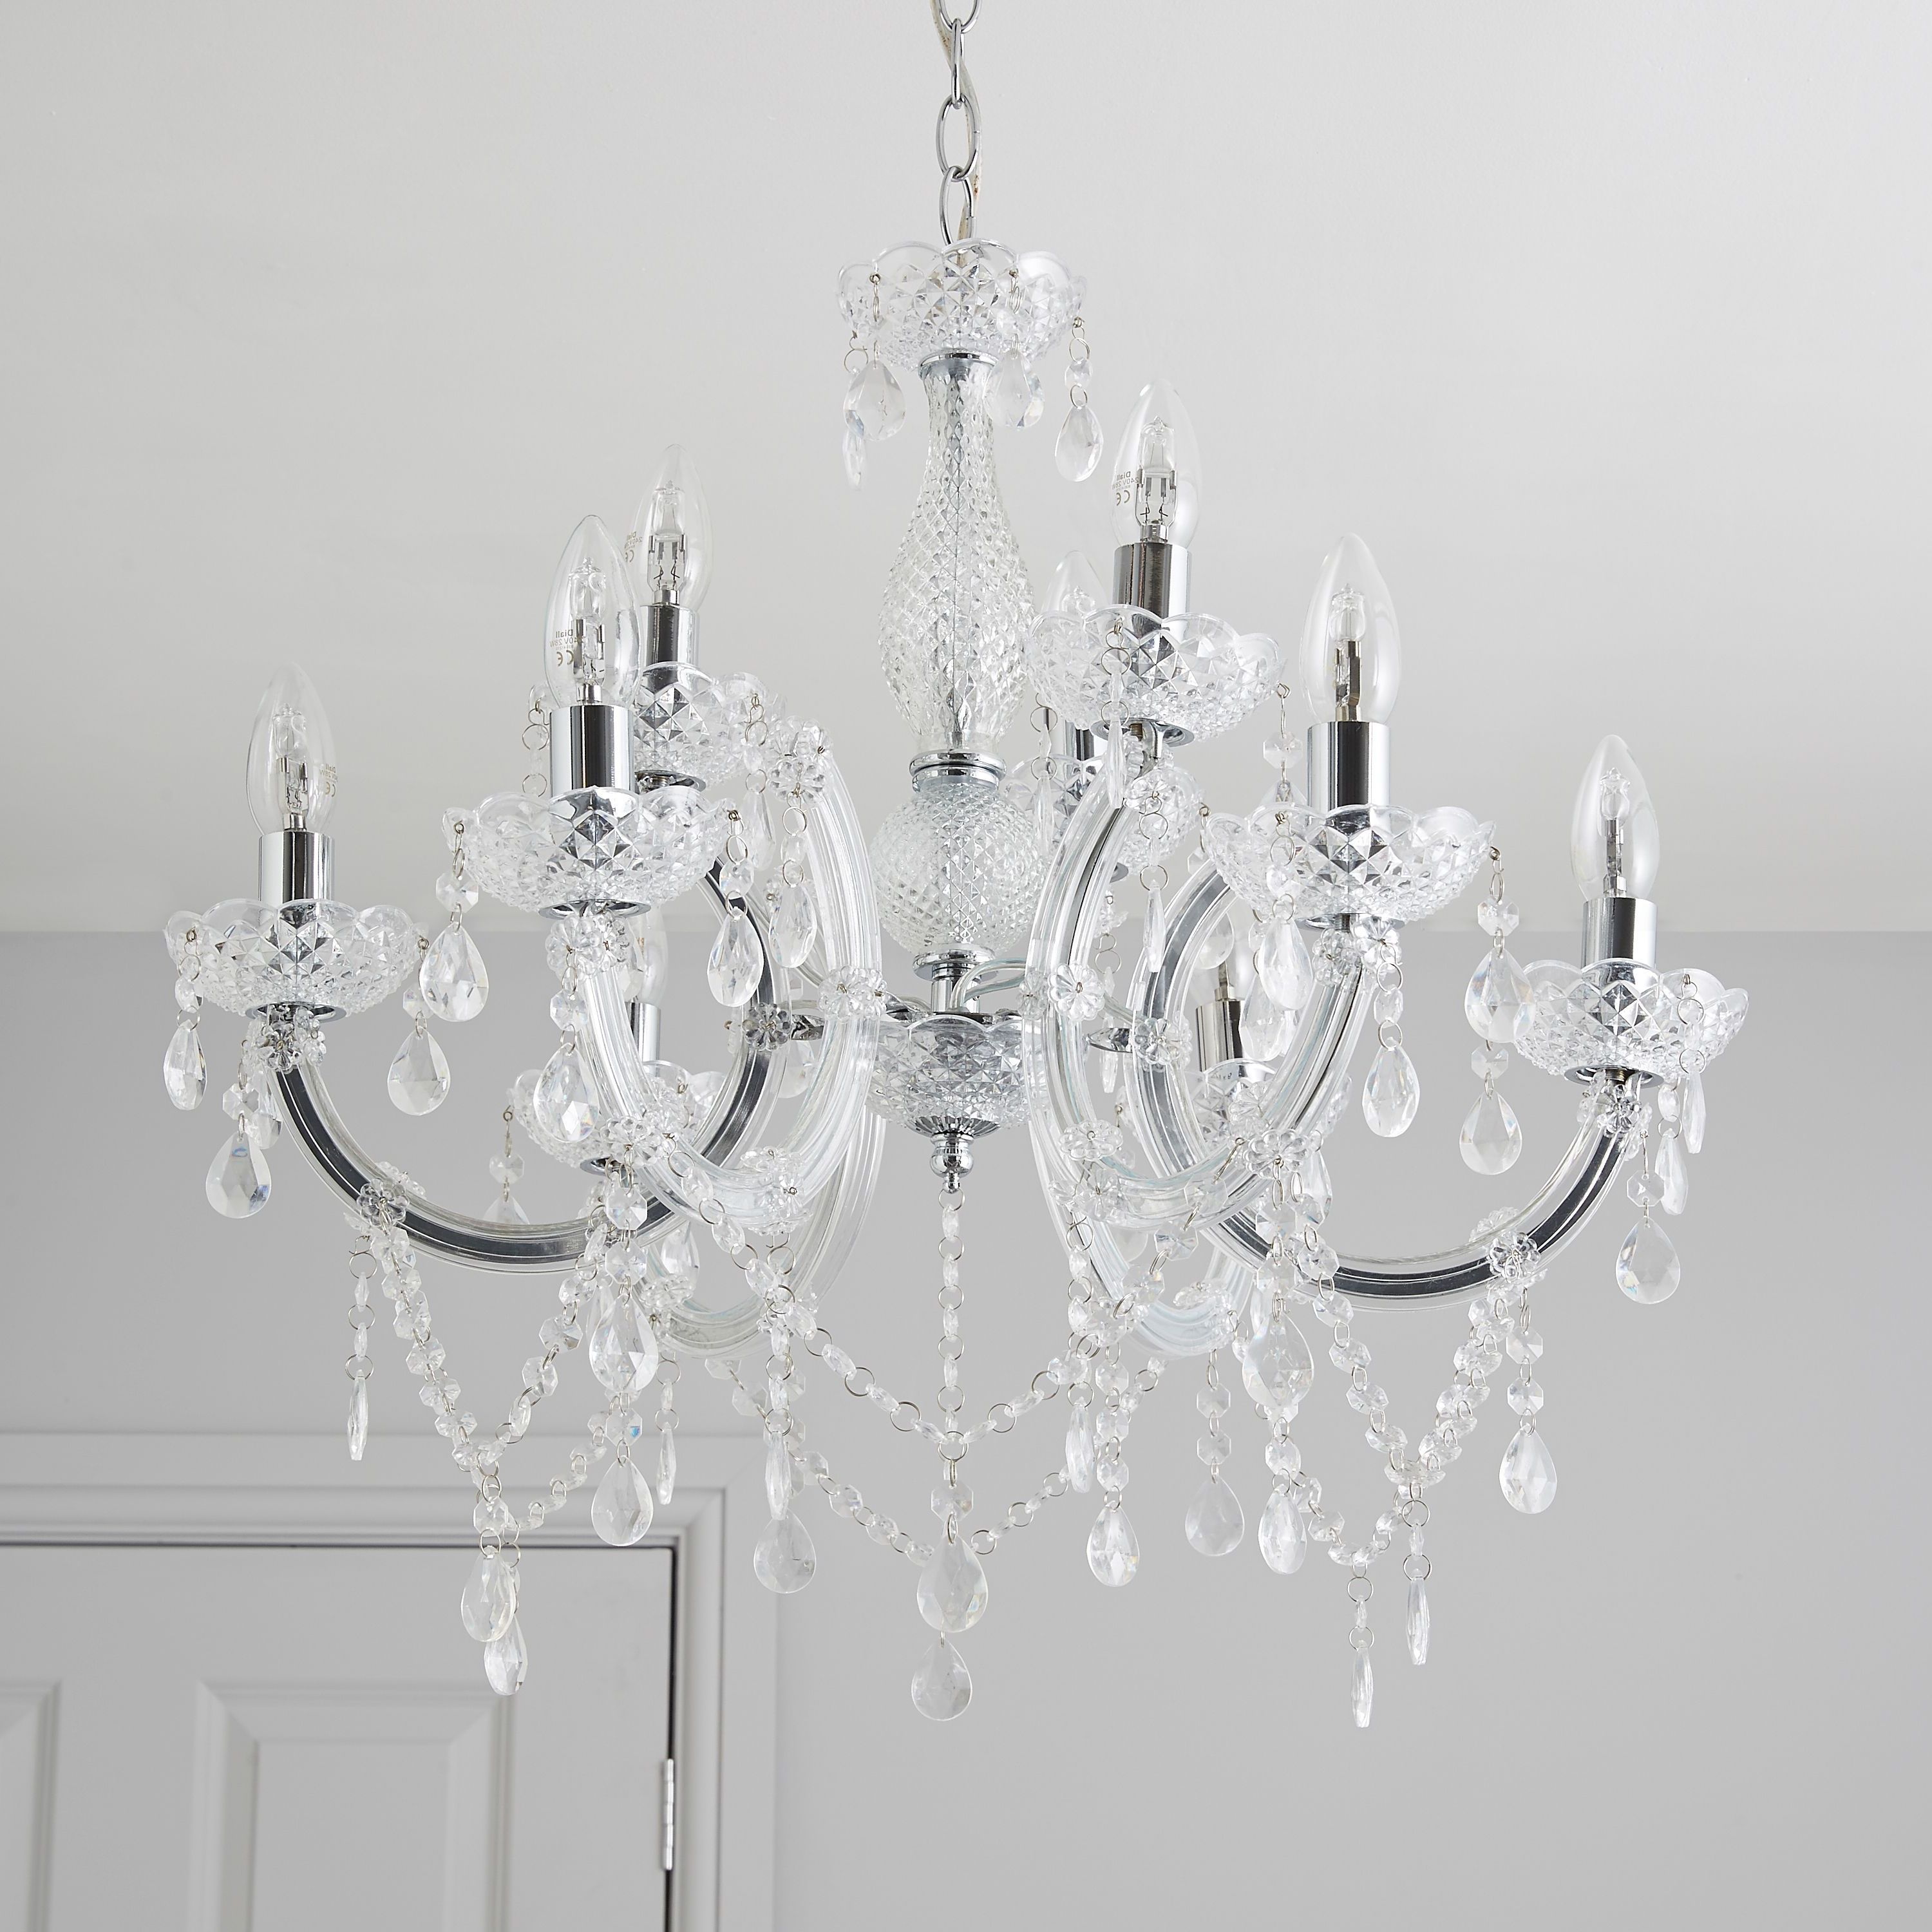 Fashionable Annelise Crystal Droplets Silver 9 Lamp Pendant Ceiling Light Inside Outdoor Ceiling Lights At B&q (Photo 4 of 20)